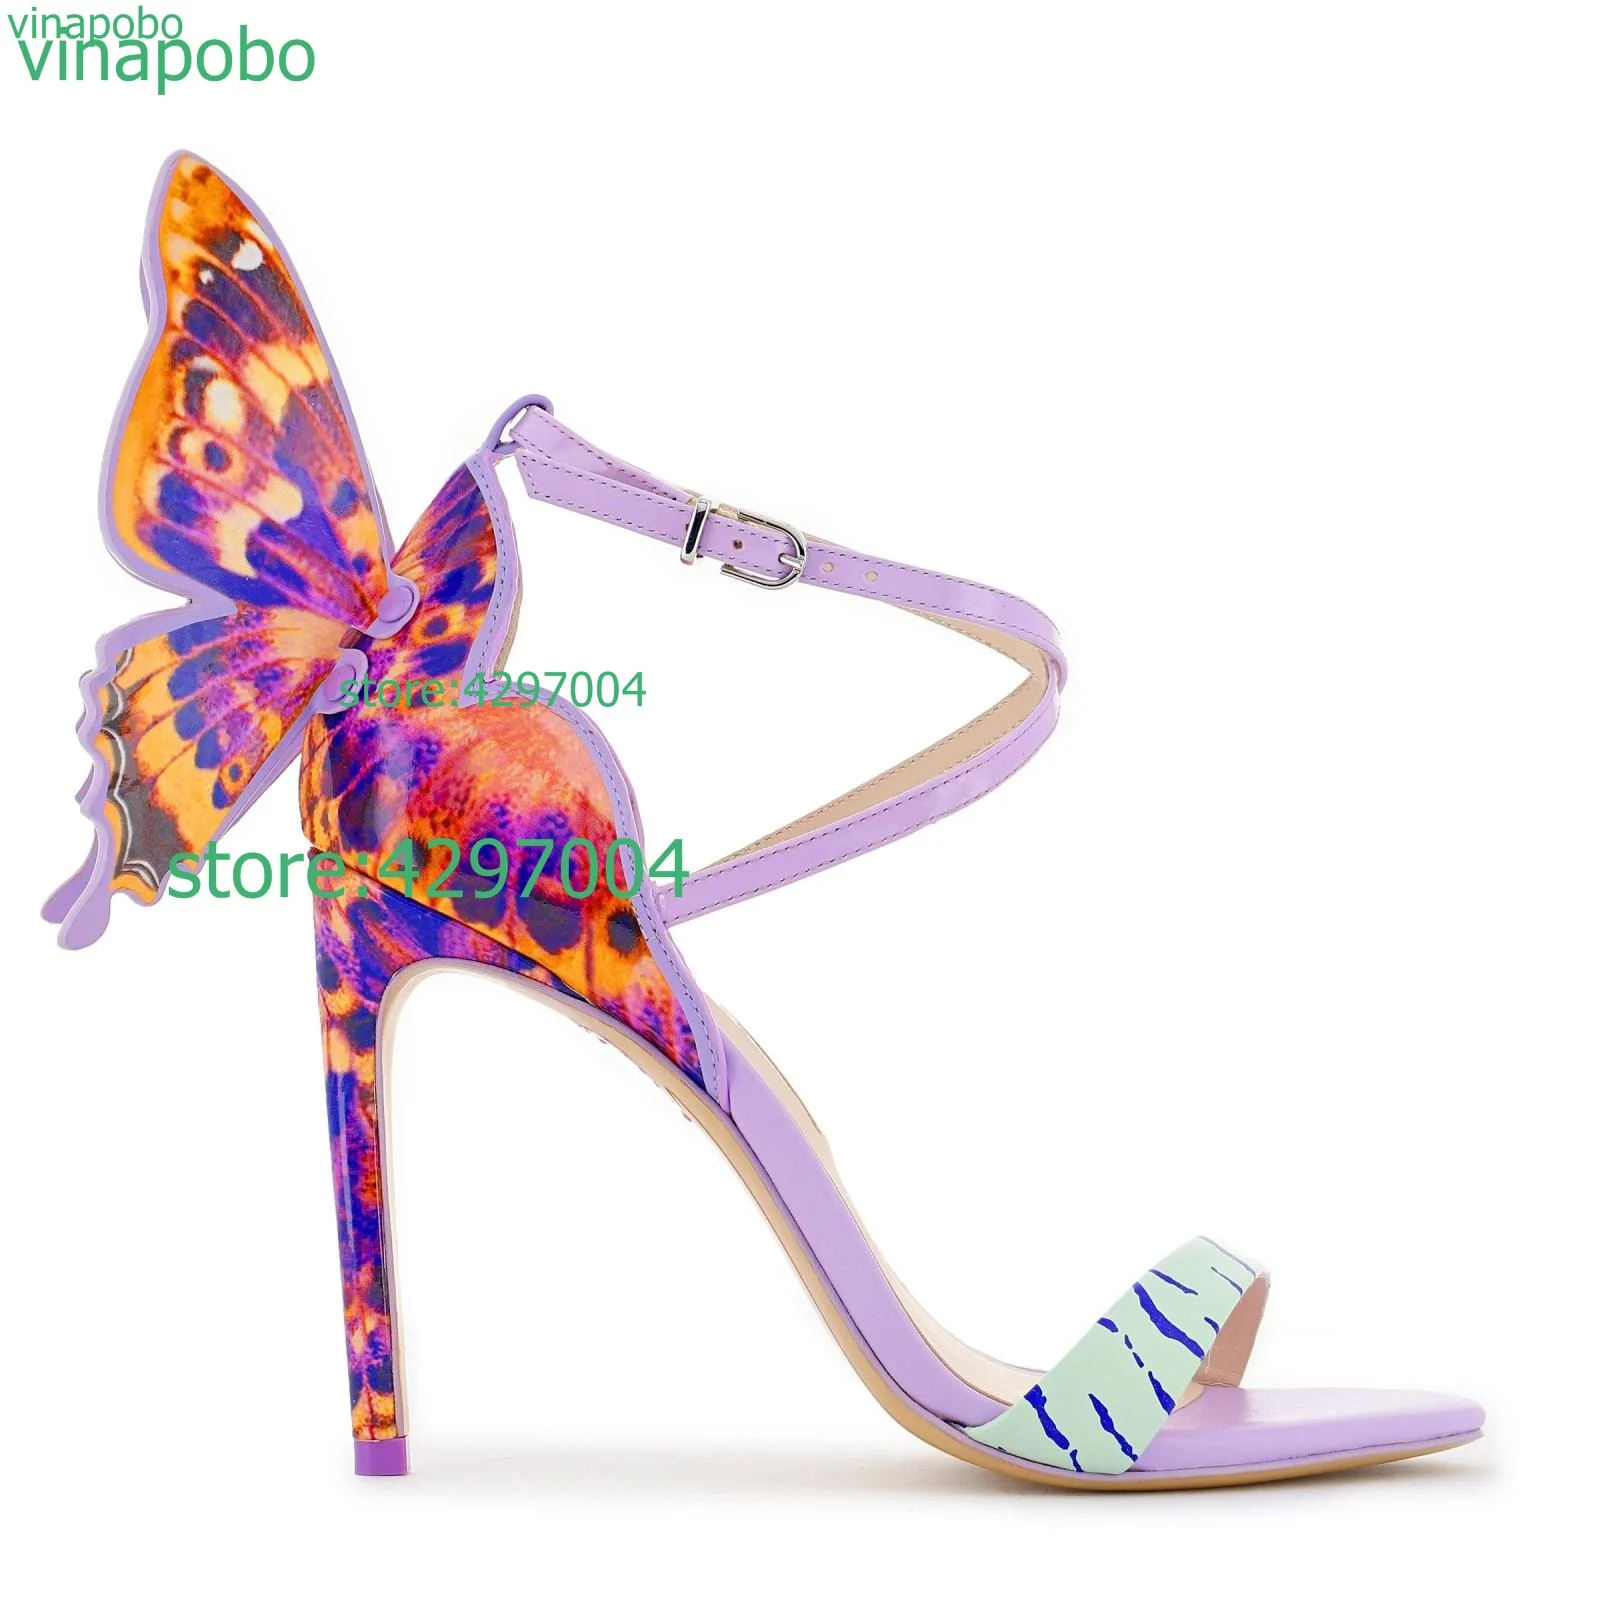 Vinapobo New Women pumps Butterfly Wings single shoes for women sexy peep toe high heel sandals party wedding shoes woman sandal images - 6